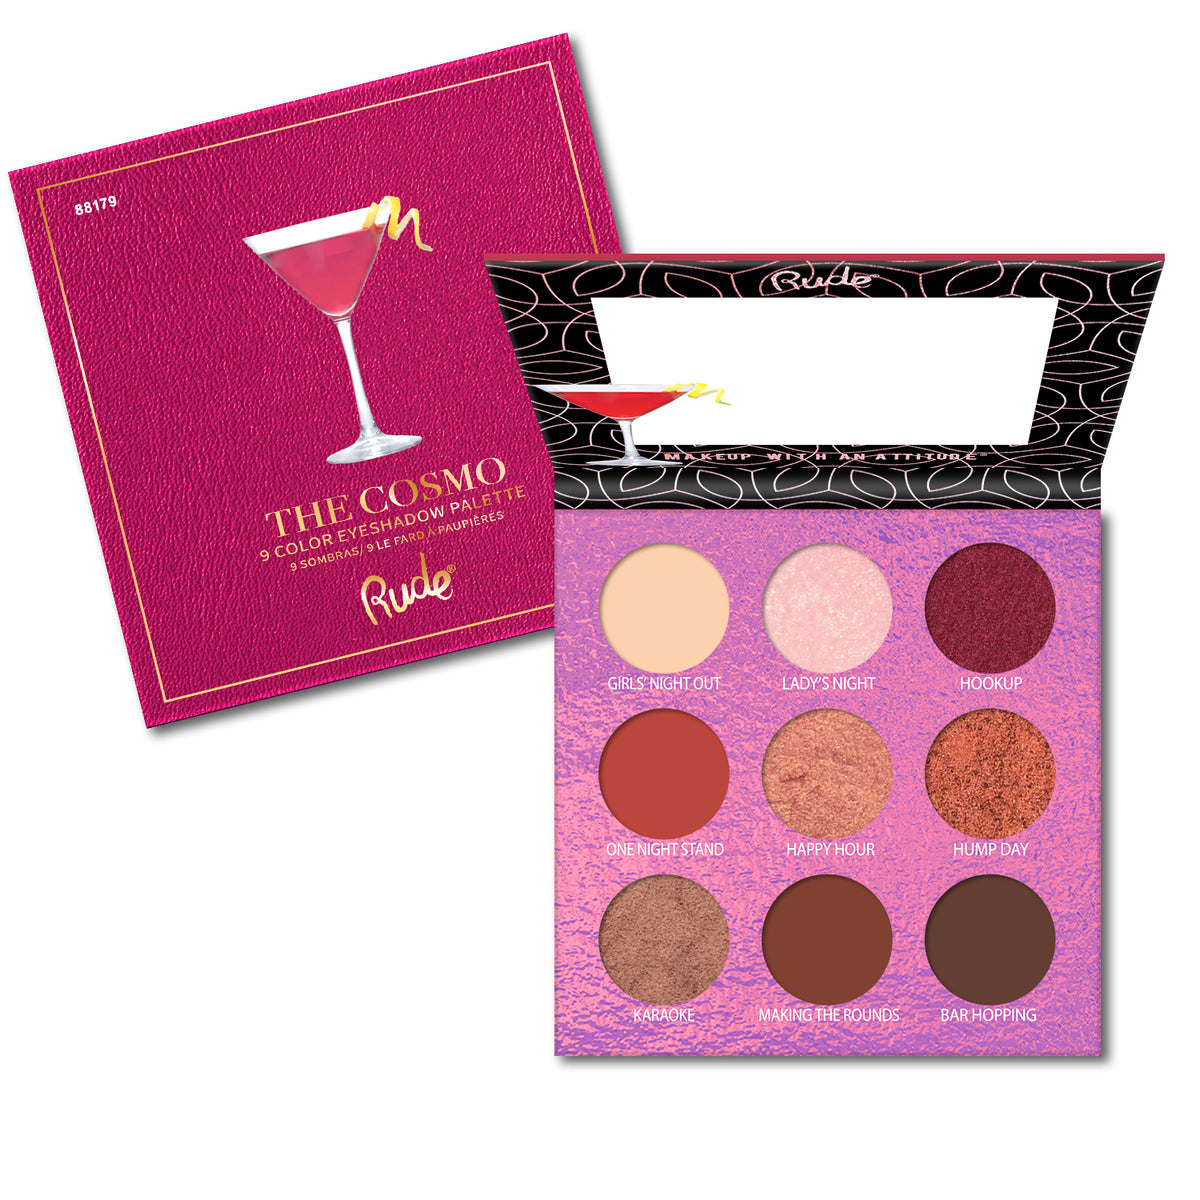 Cocktail Party 9 Color Vegan Eyeshadow Palette - The Cosmo